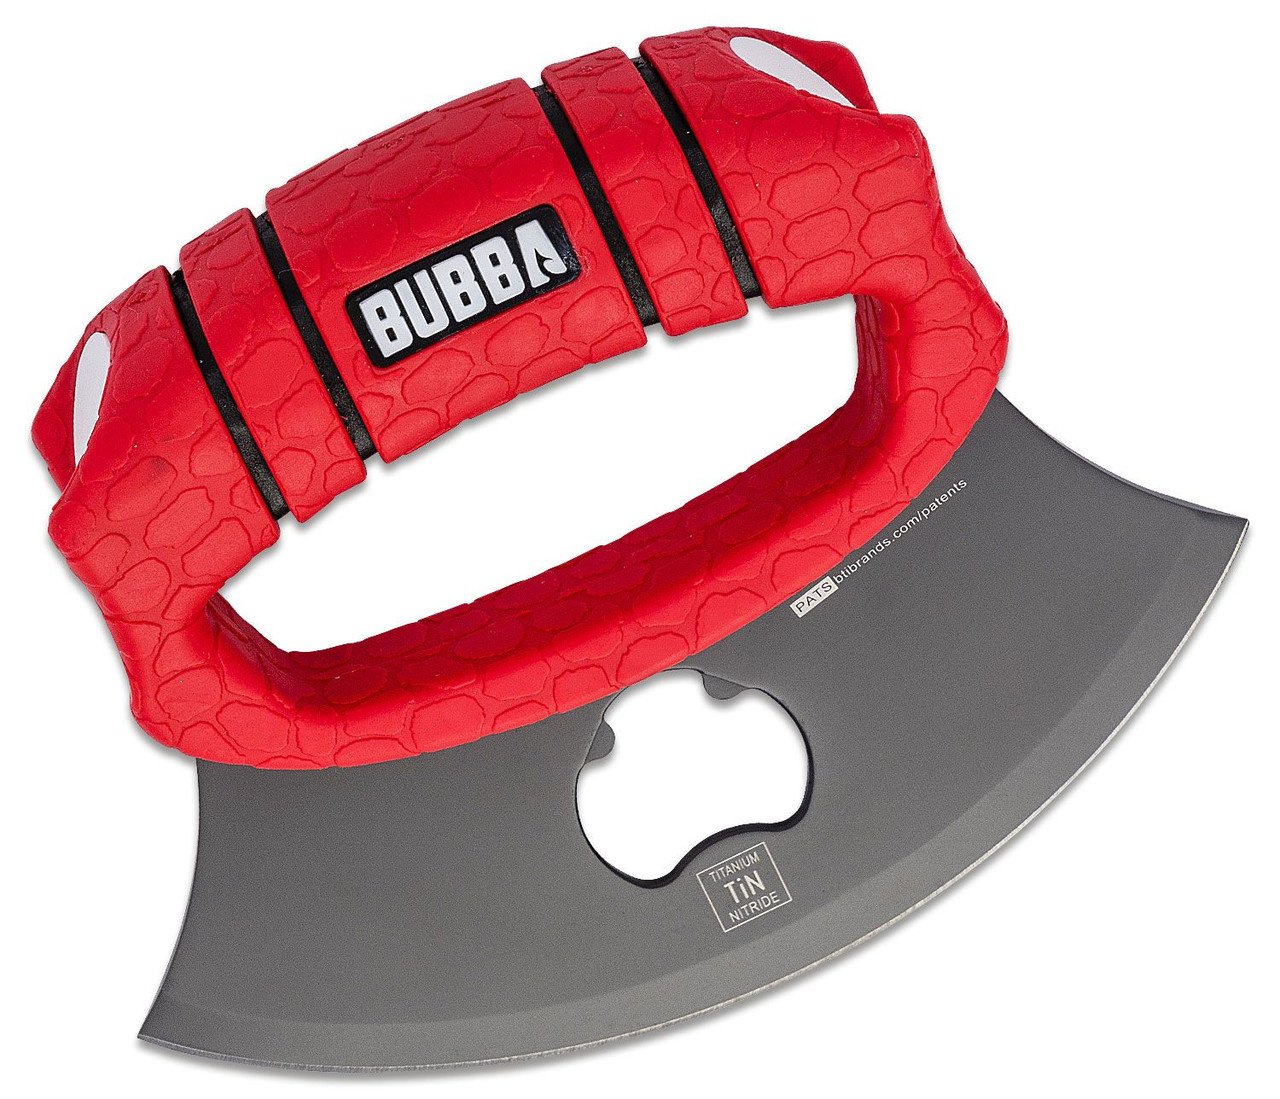 BUBBA ULU Knife with Non-Slip Grip Handle, Curved Blade